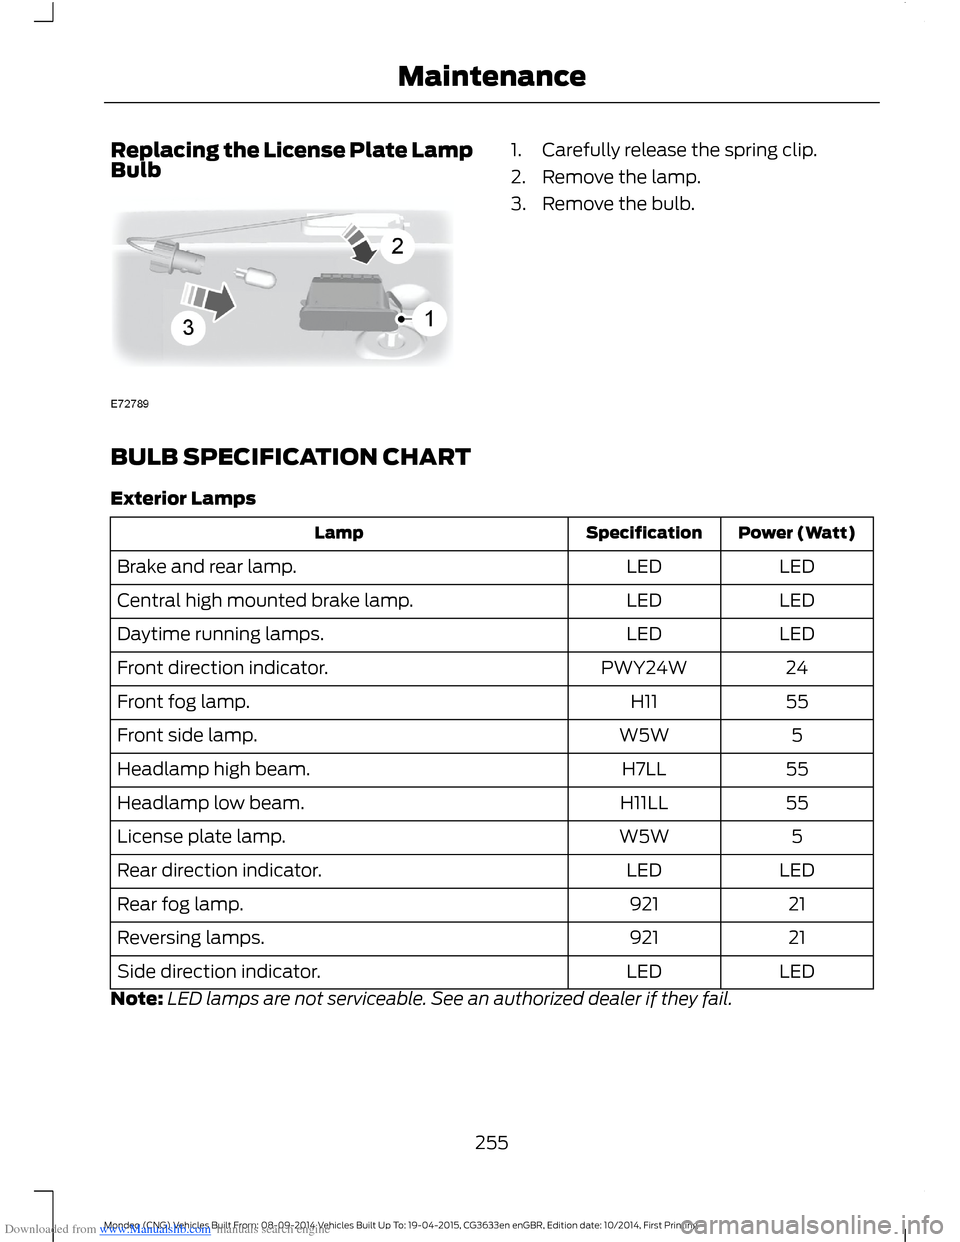 FORD MONDEO 2014 4.G Owners Manual Downloaded from www.Manualslib.com manuals search engine Replacing the License Plate LampBulb1.Carefully release the spring clip.
2.Remove the lamp.
3.Remove the bulb.
BULB SPECIFICATION CHART
Exterio